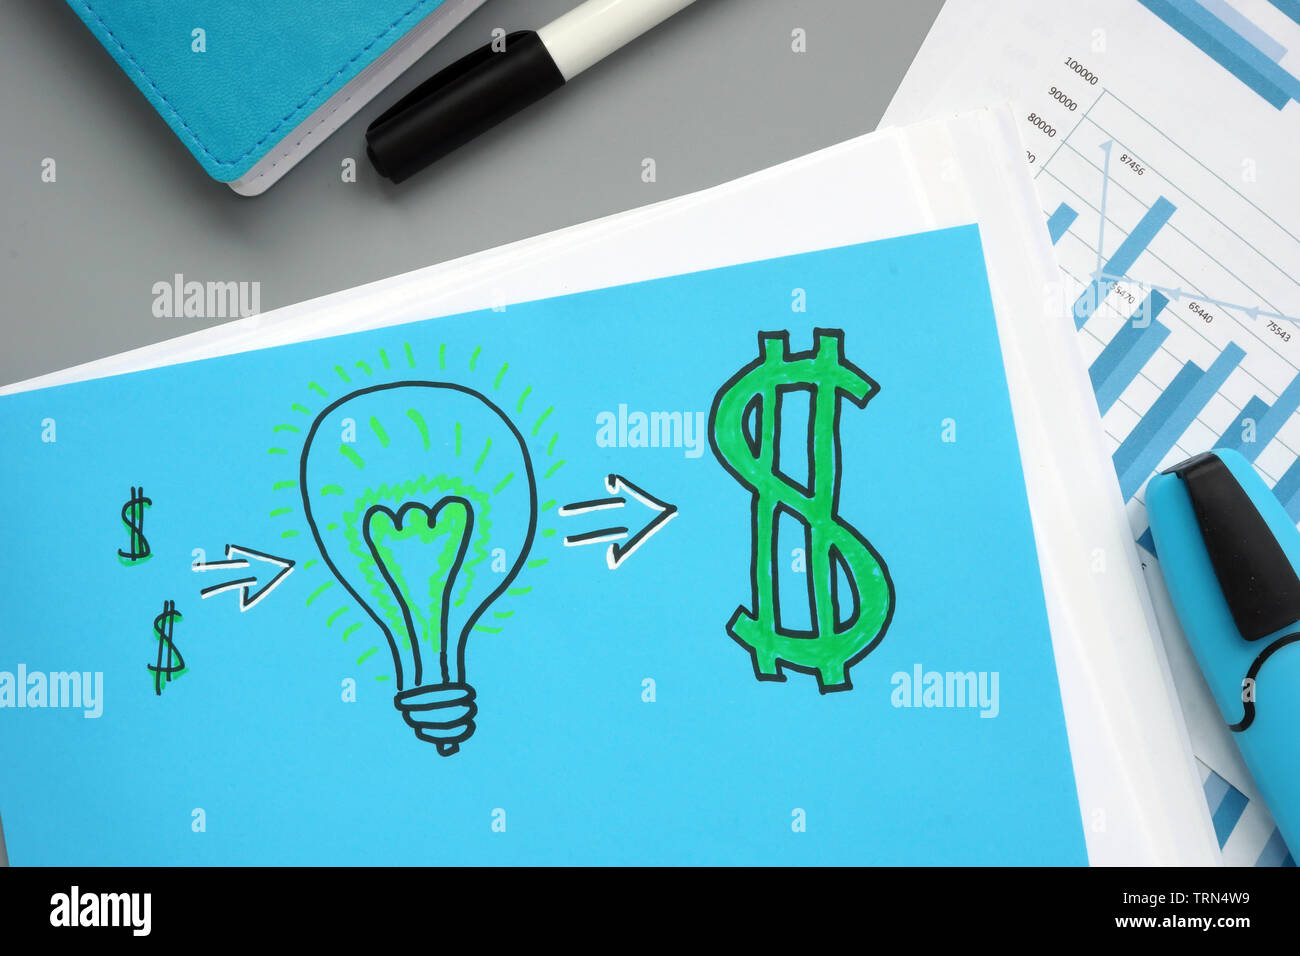 Signs of bulb and dollar. Successful business start up concept. Stock Photo